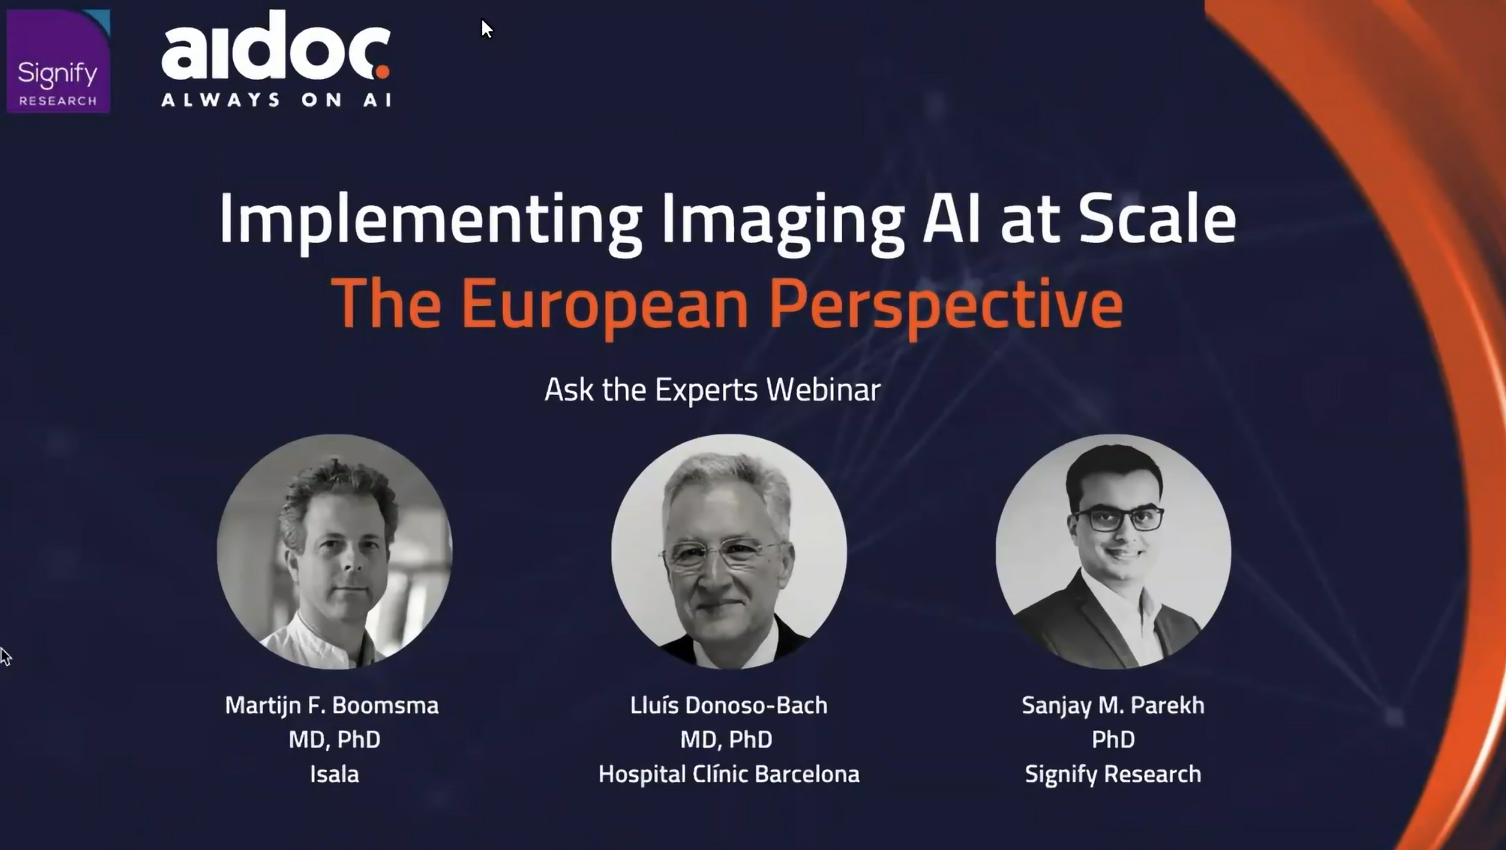 Webinar banner ad for implementing imaging AI at scale the European perspective